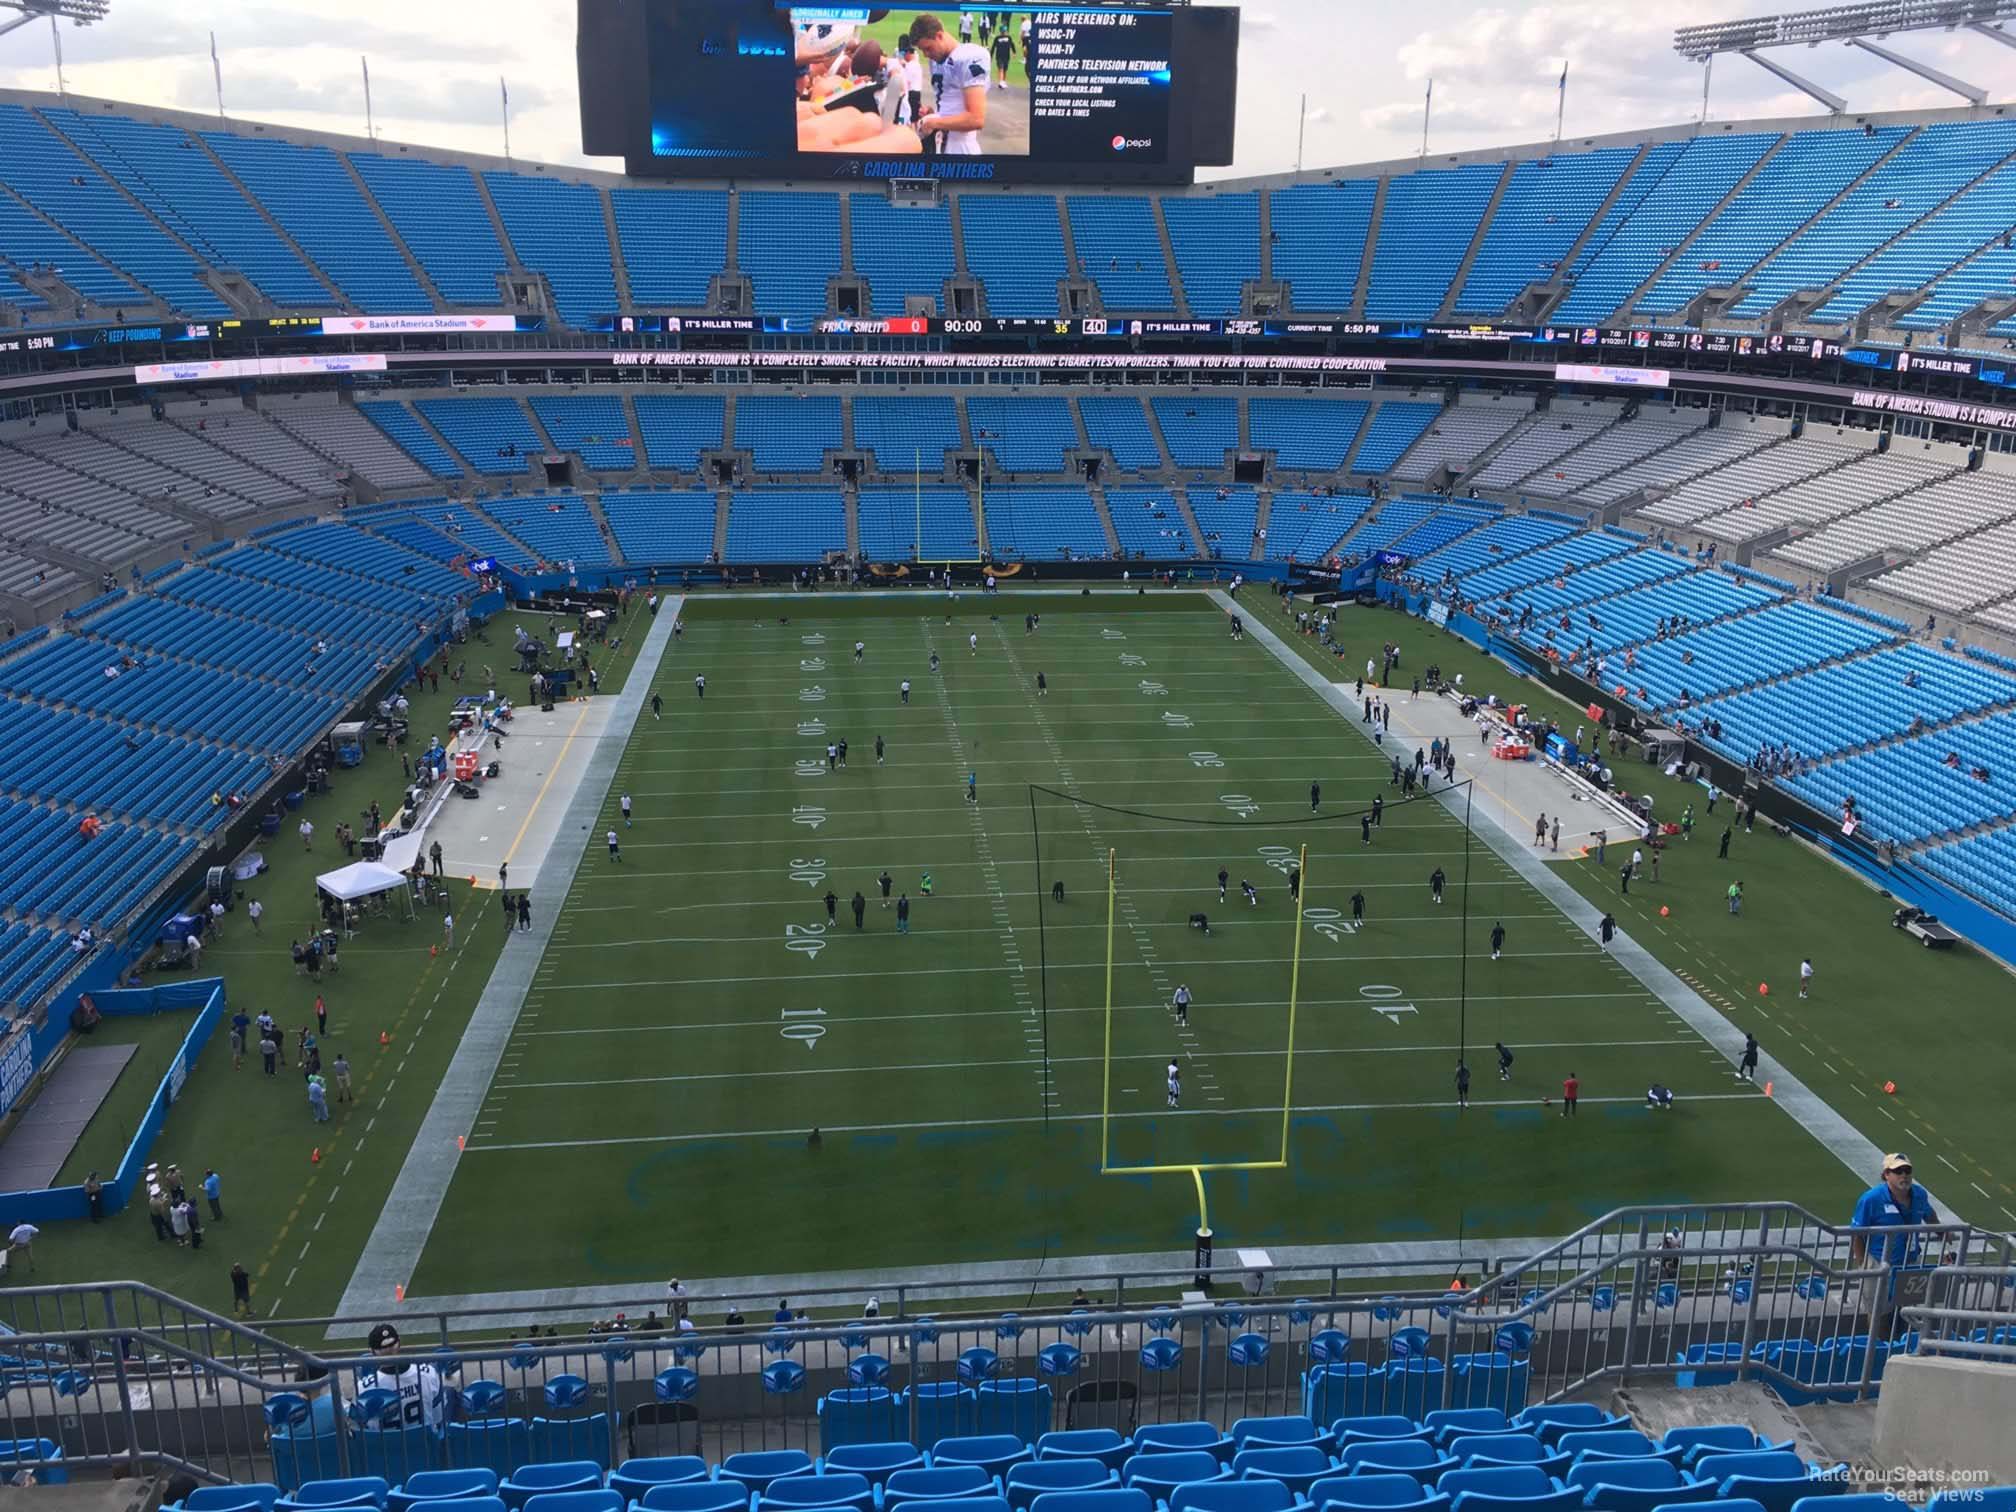 section 529, row 9 seat view  for football - bank of america stadium